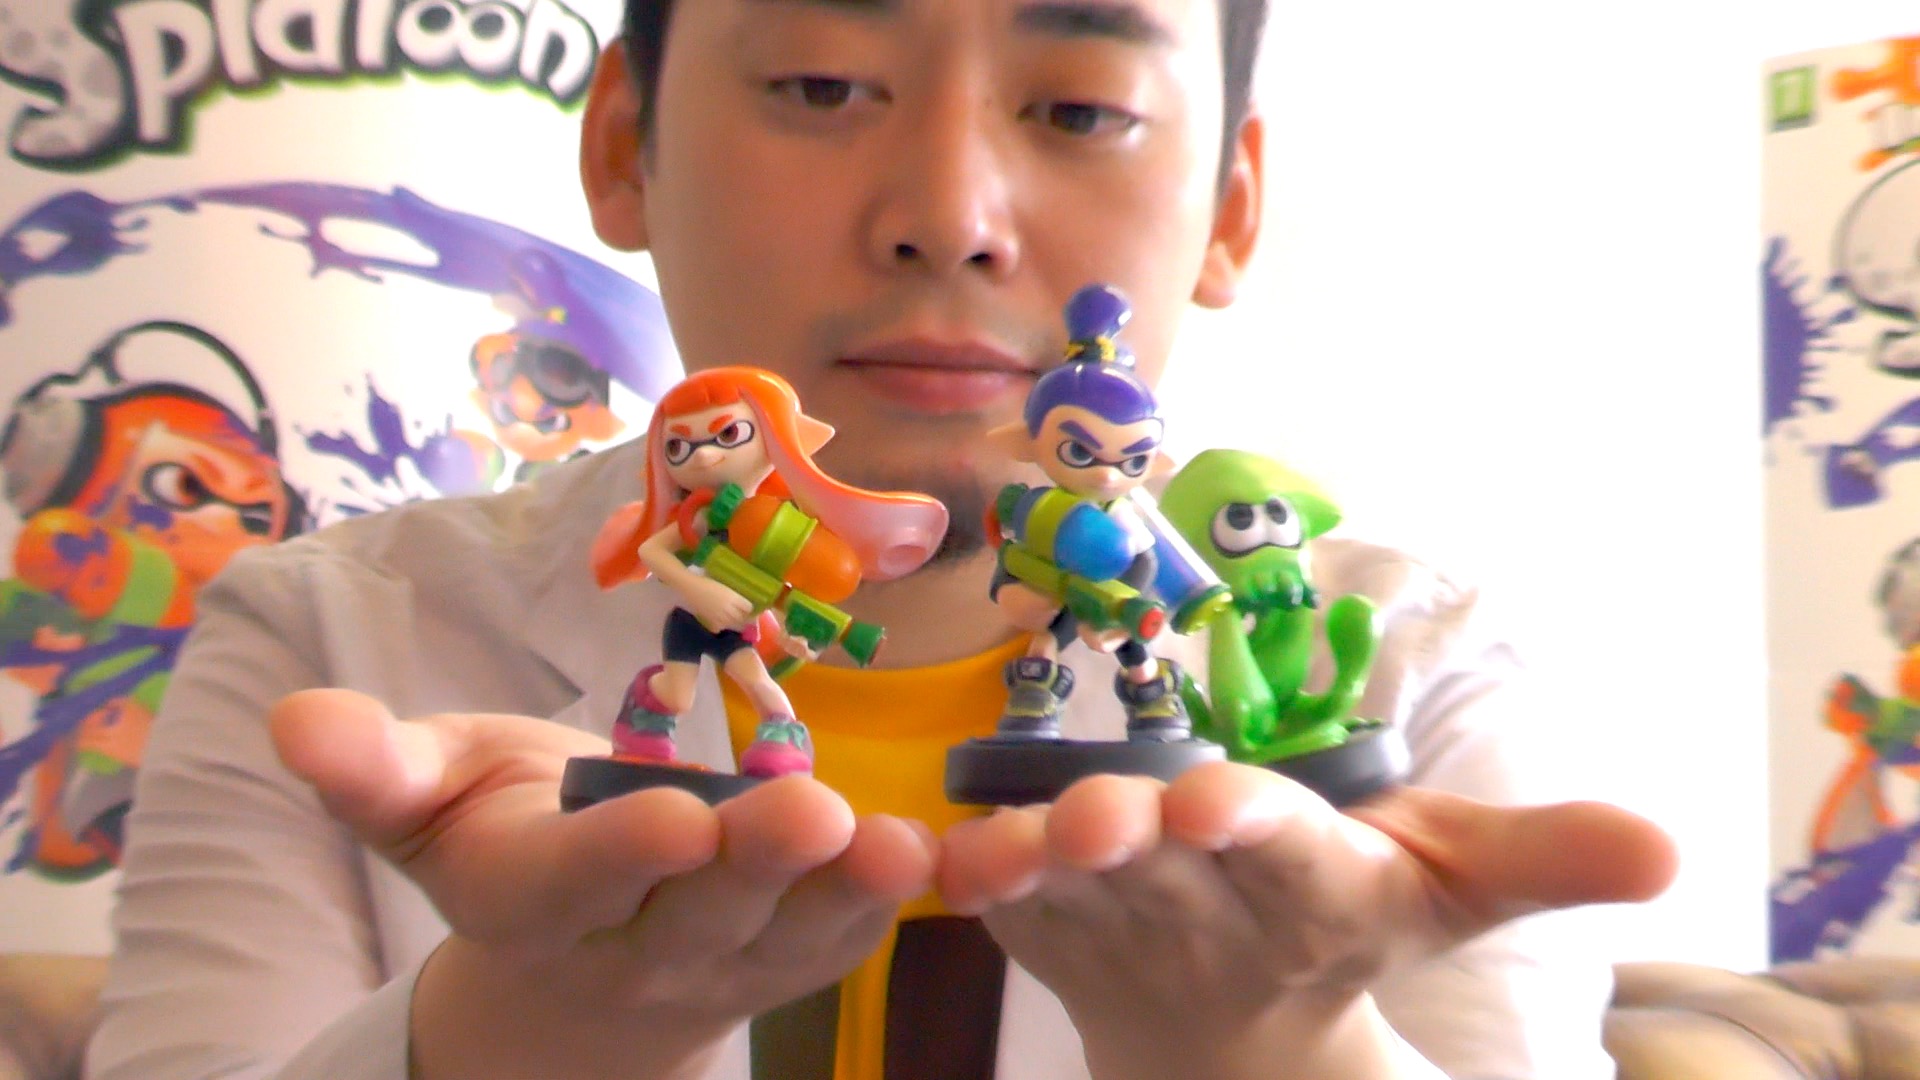 Splatoon director answers children’s questions about the game